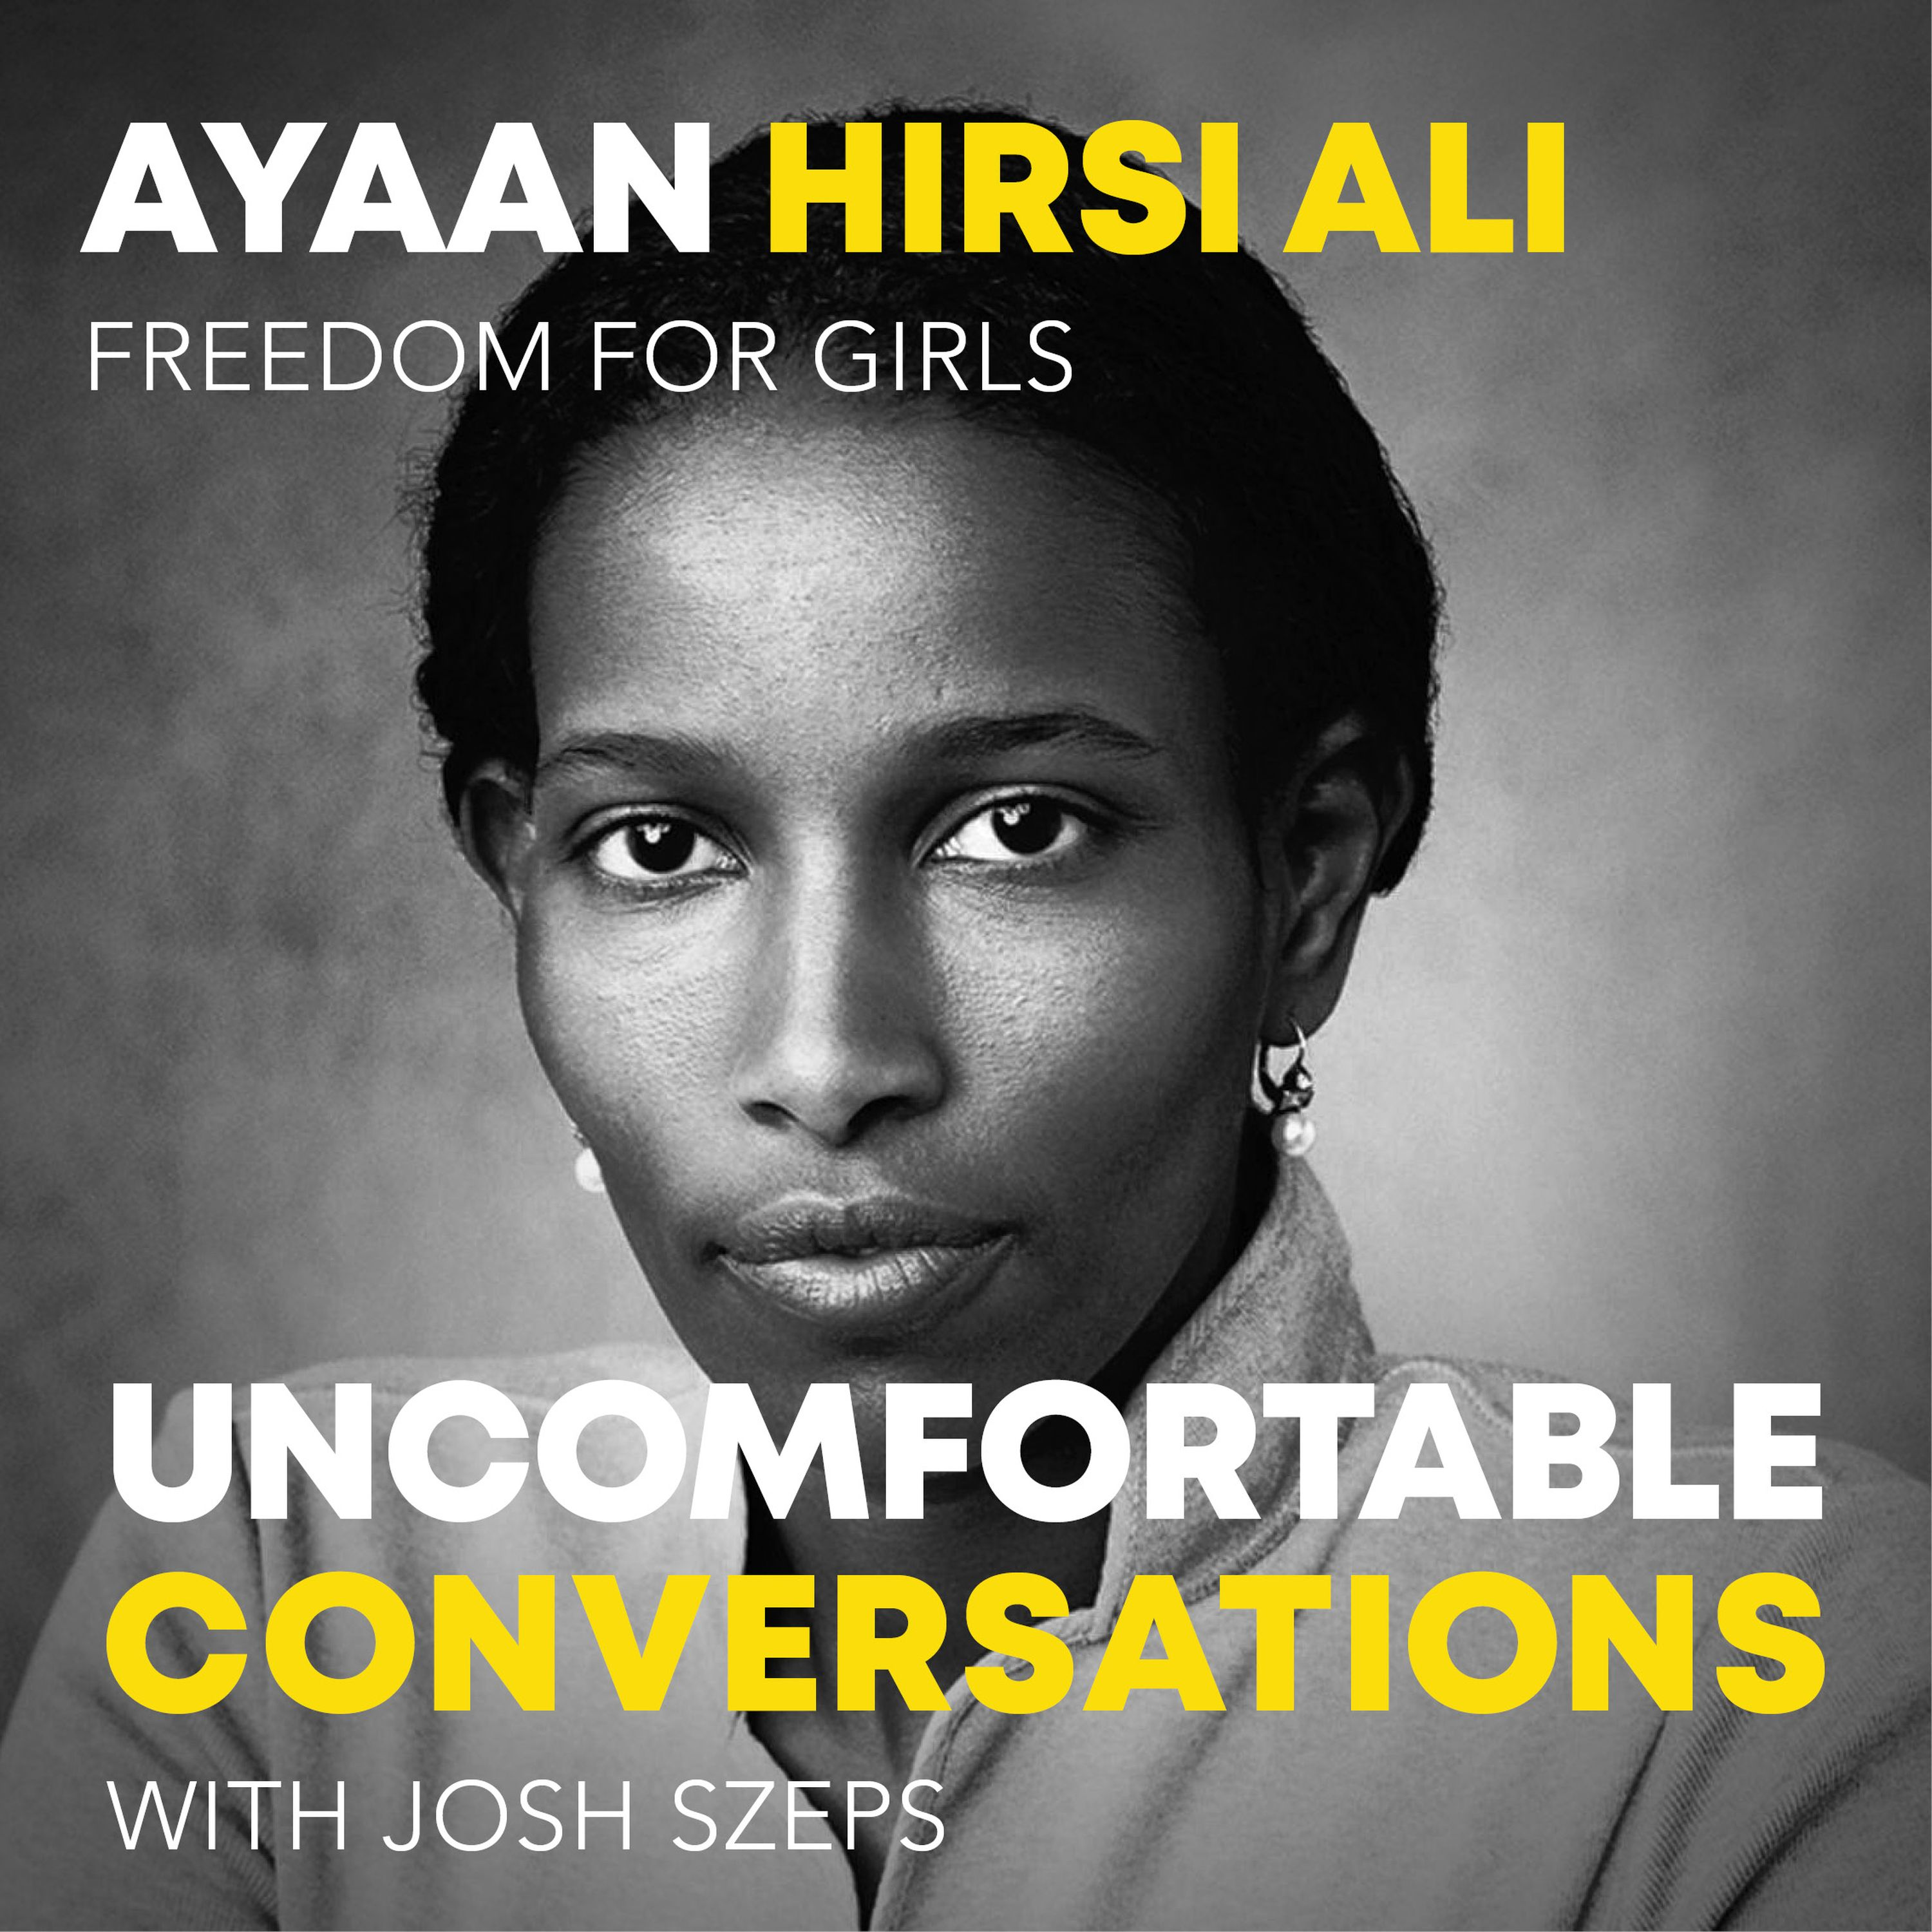 "Freedom For Girls" with Ayaan Hirsi Ali